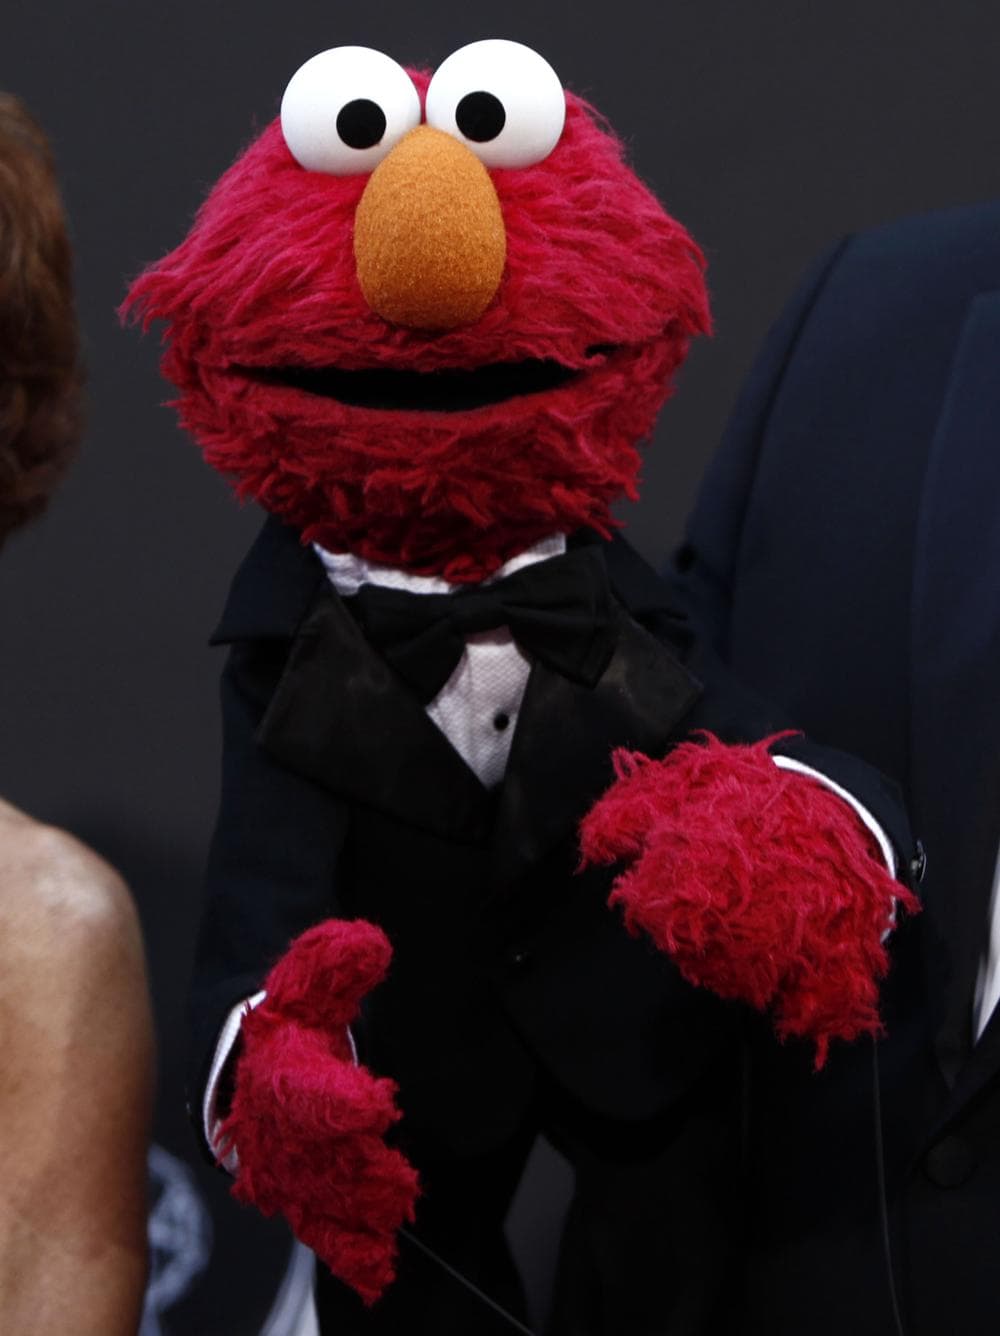 Elmo, of the children's television show Sesame Street, arrives at the Daytime Emmy Awards on Sunday Aug. 30, 2009, in Los Angeles. (AP)